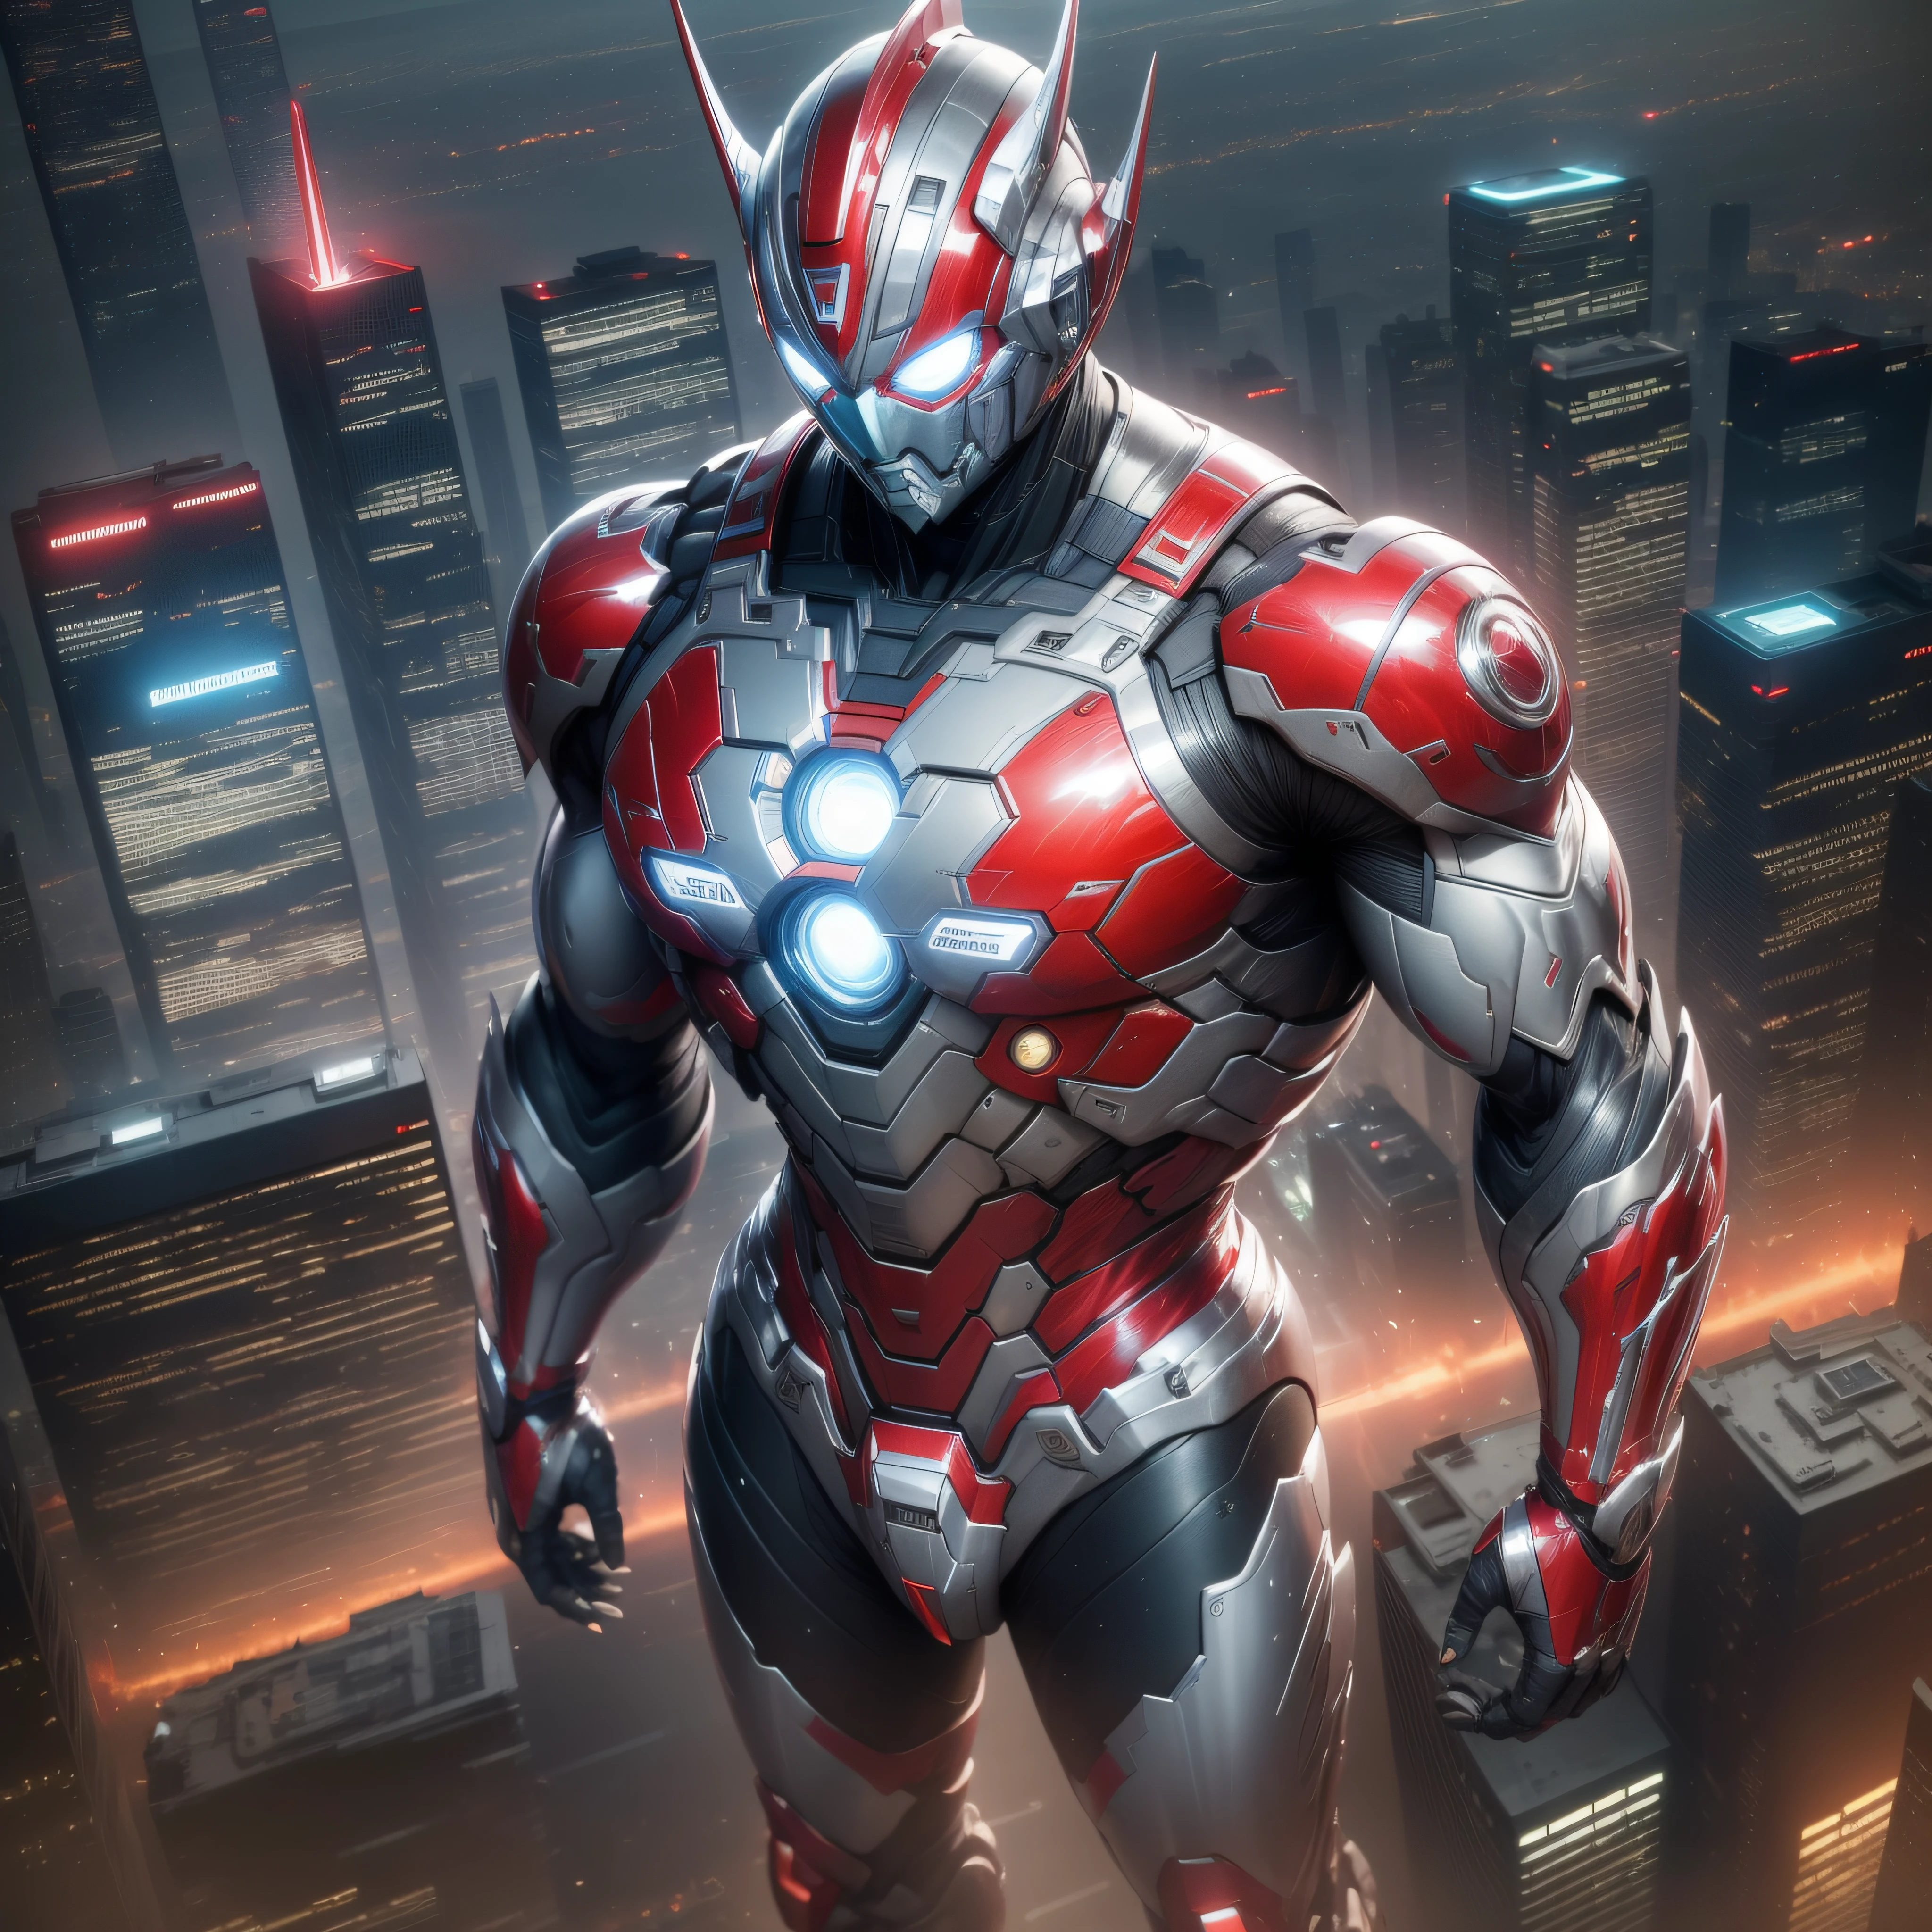 (Masterpiece, Superb Quality, Super Delicate, High Resolution), Male Focus, (((Mobile Ultraman))), (No Muscles))), (His head is tapered, his body is made of (((red chrome))) and silver (((chrome))), his arms are streamlined, he has a small round calculator on his chest, he looks tall and athletic, the overall look is streamlined and modern), (standing pose), pose for photos, high angle, dark night, populated city, background details, ((((whole body))), from above, solo, photo-realistic, octane render, unreal engine, ultra-realistic ((( Huge feeling)))